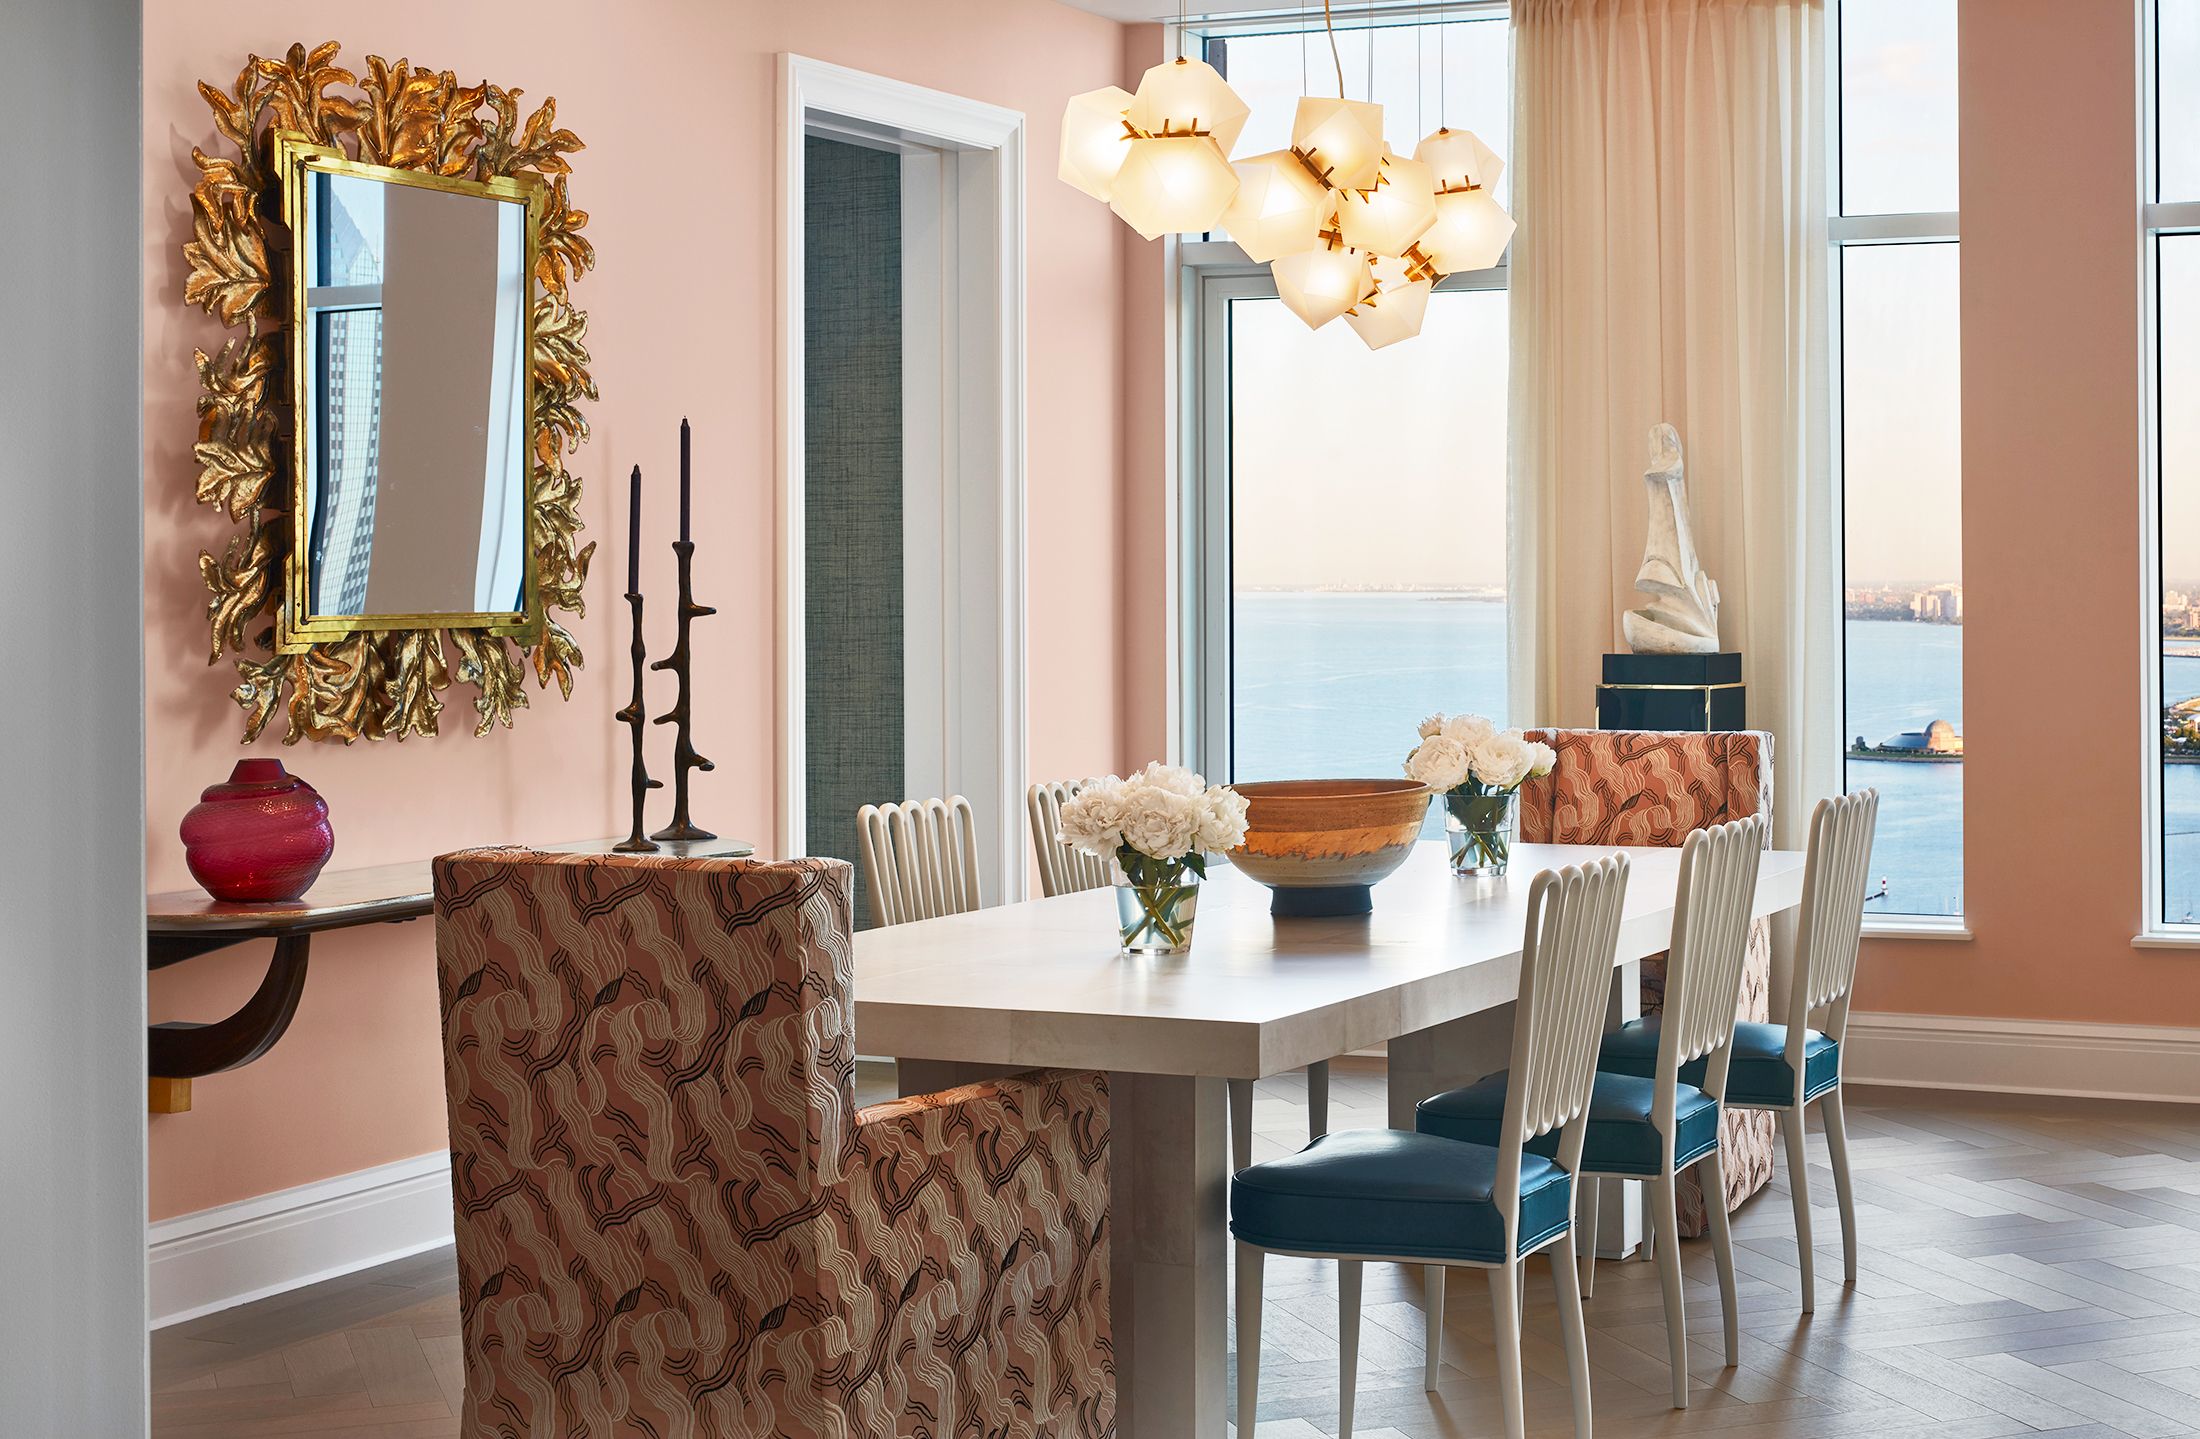 Make room for creativity while decorating your dining room